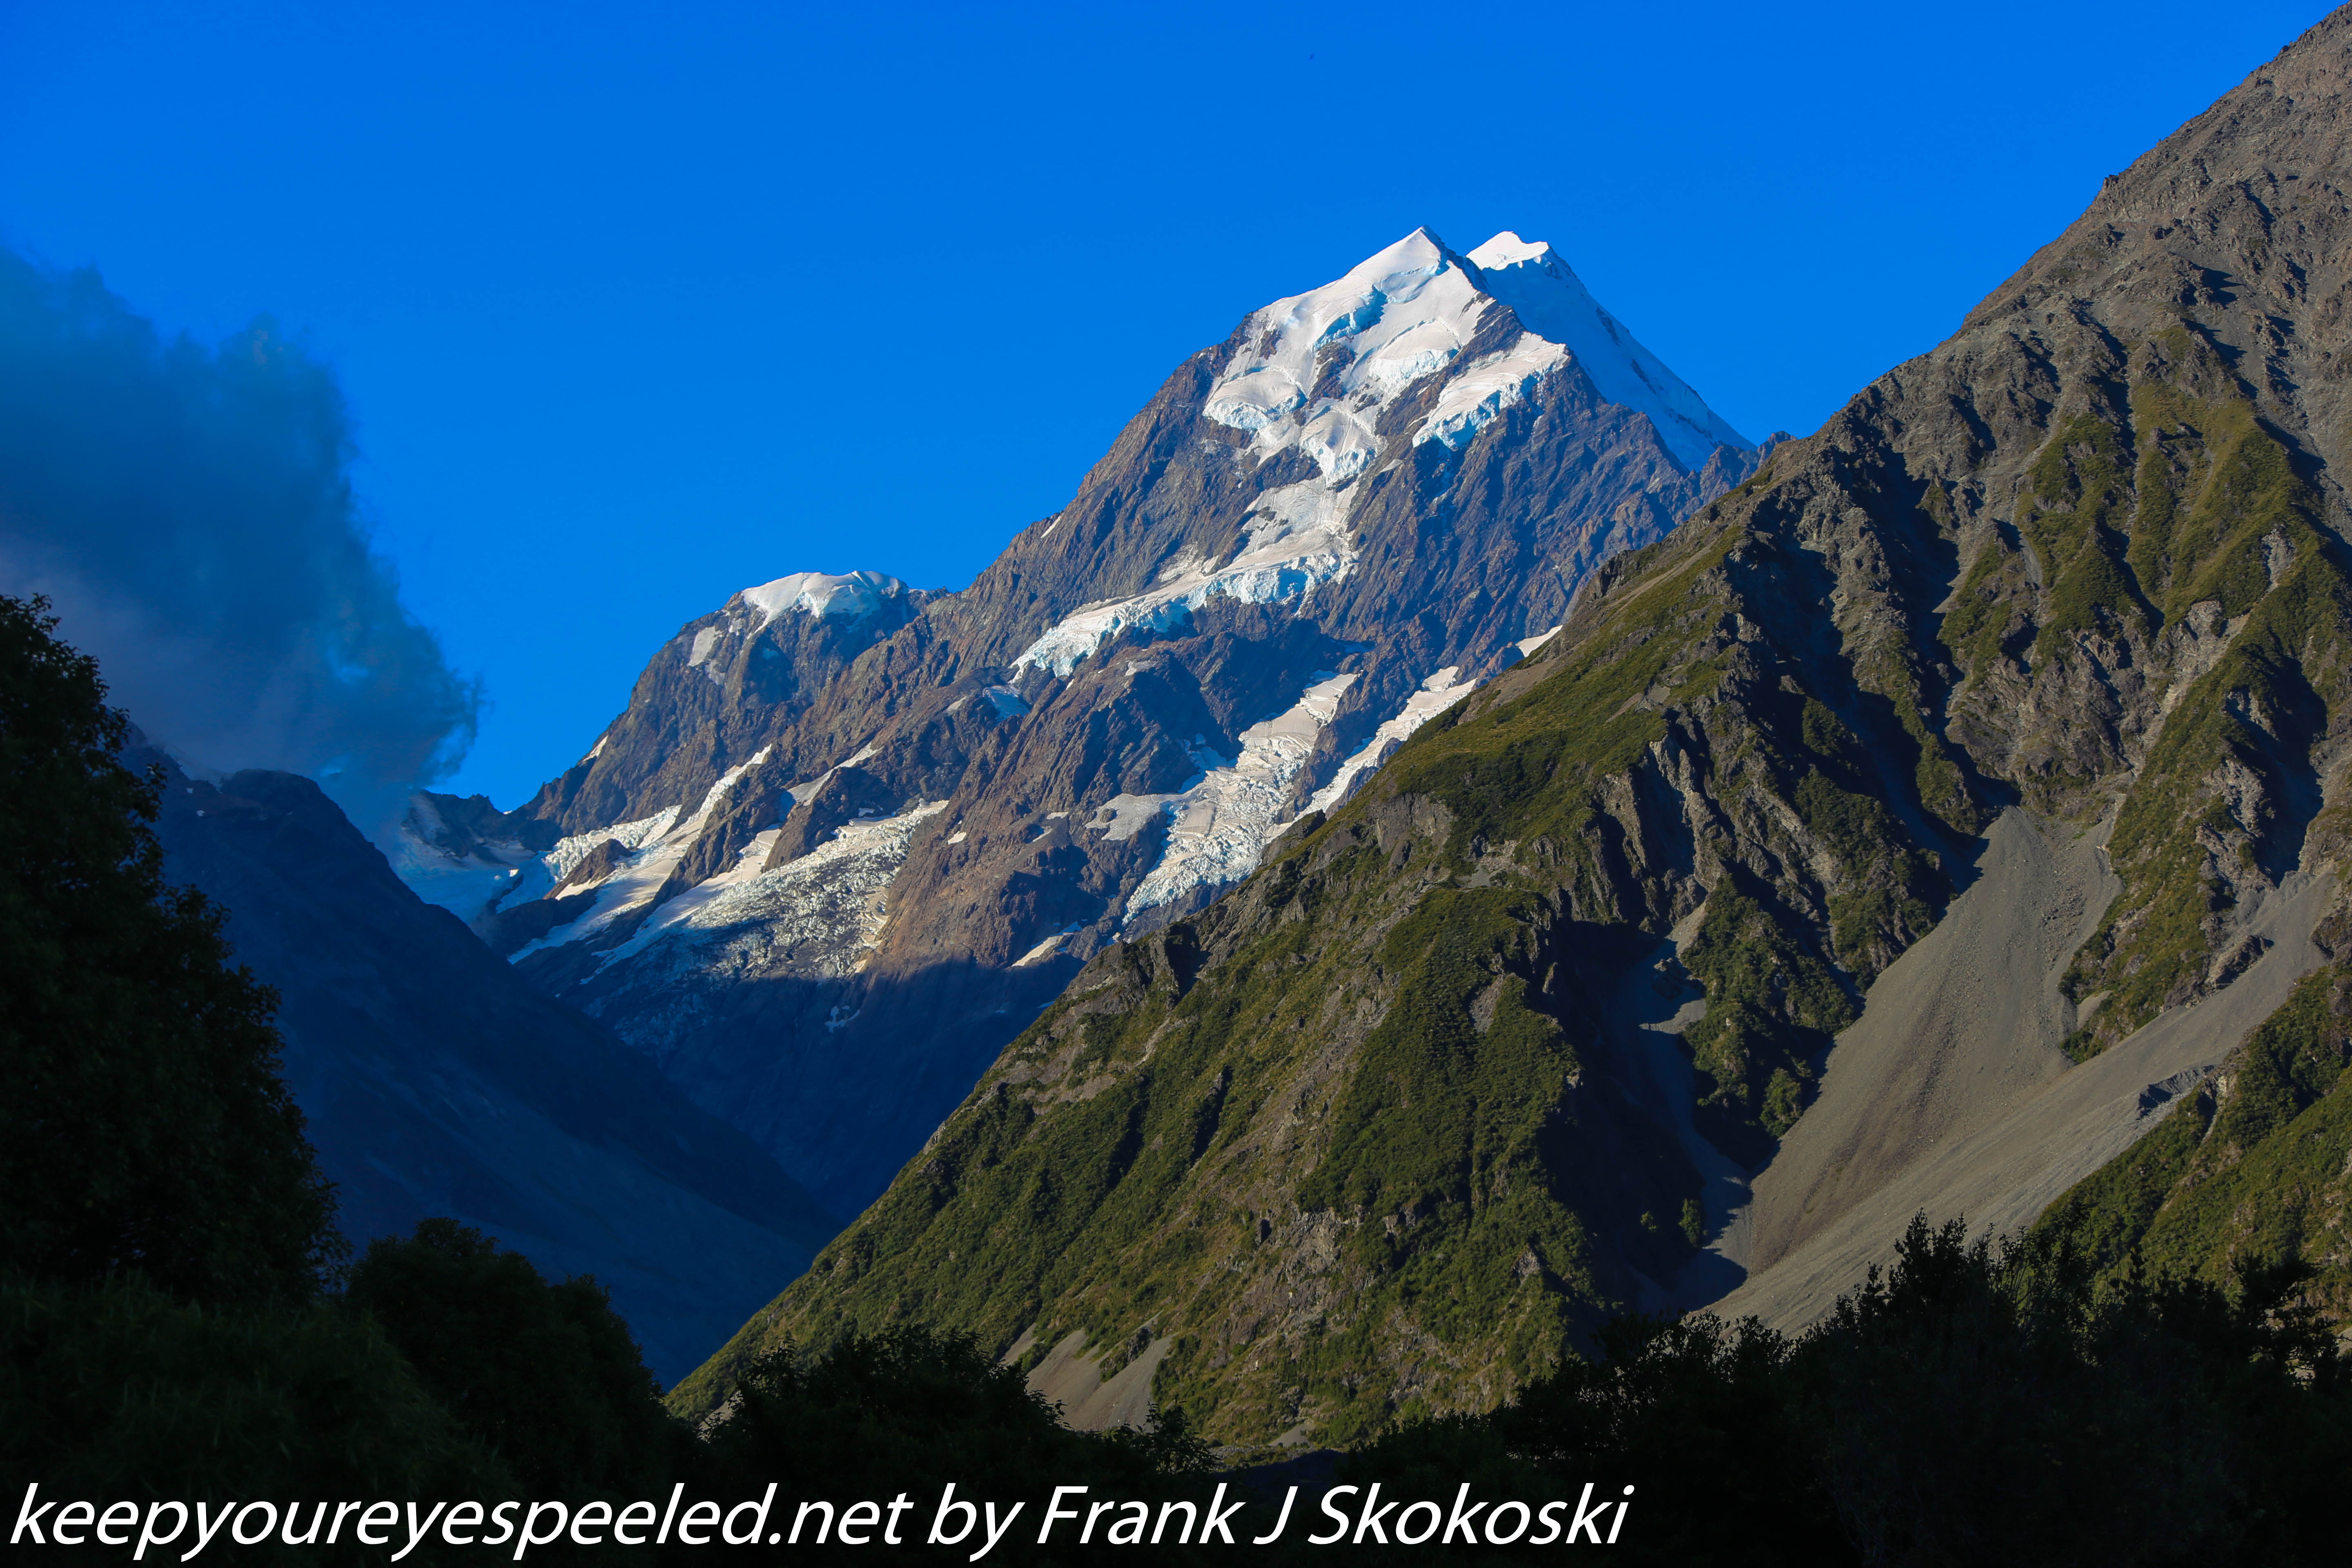 New-Zealand-Day-Five-Mount-Cook-lodge-8-of-8